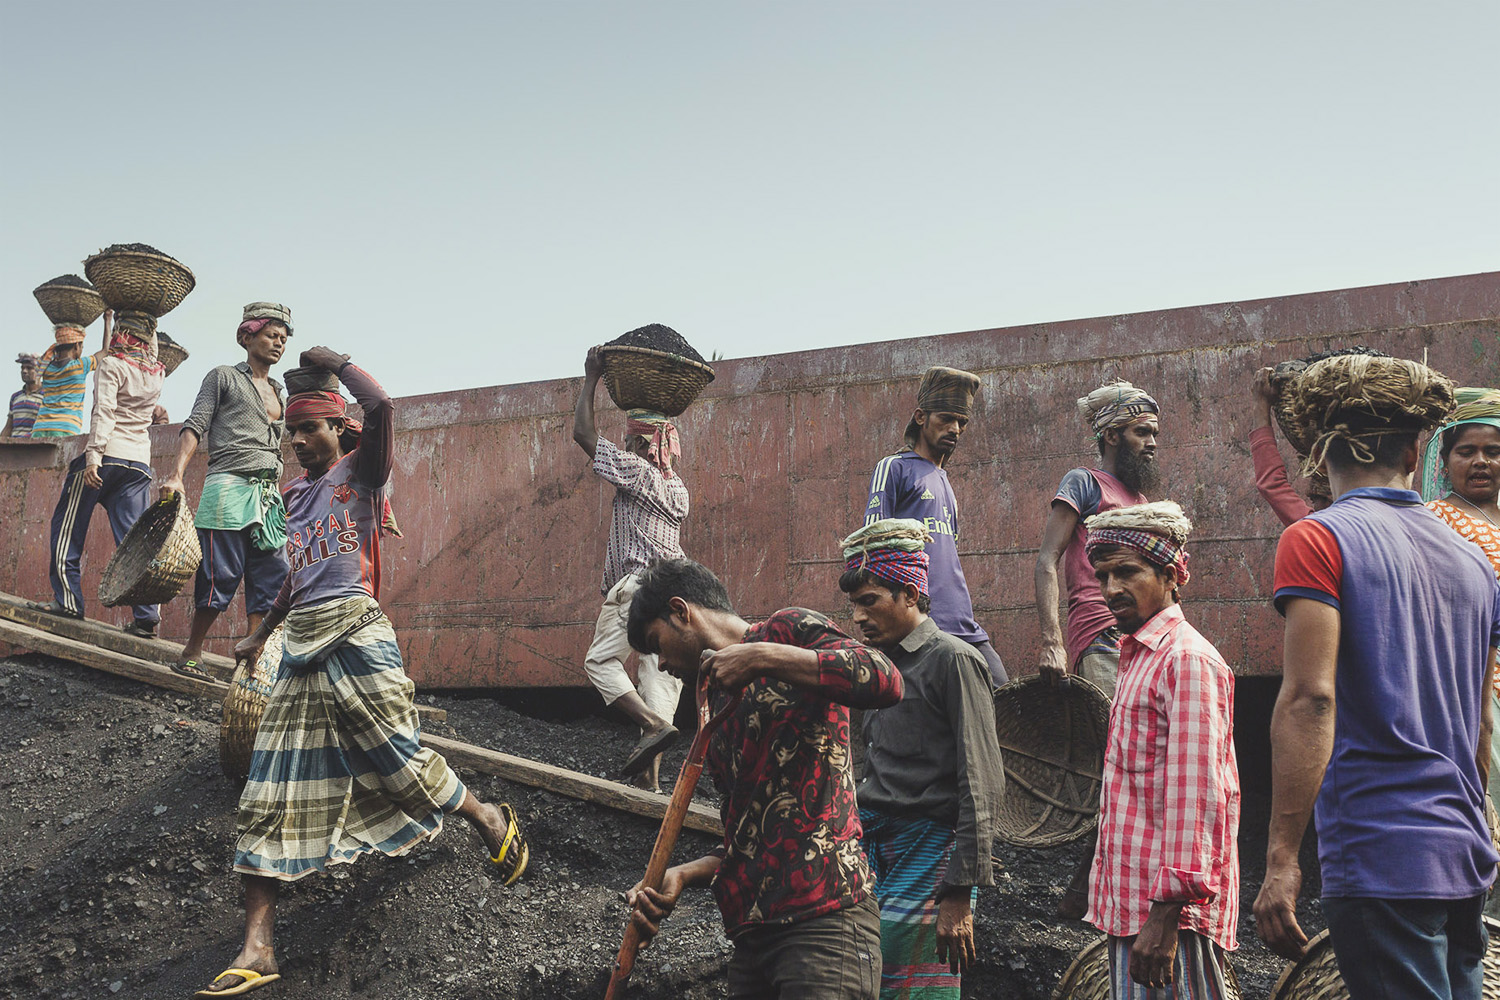 The coal workers at Dhaka, Bangladesh are consistently walking back and forth with loads of coal on their heads.